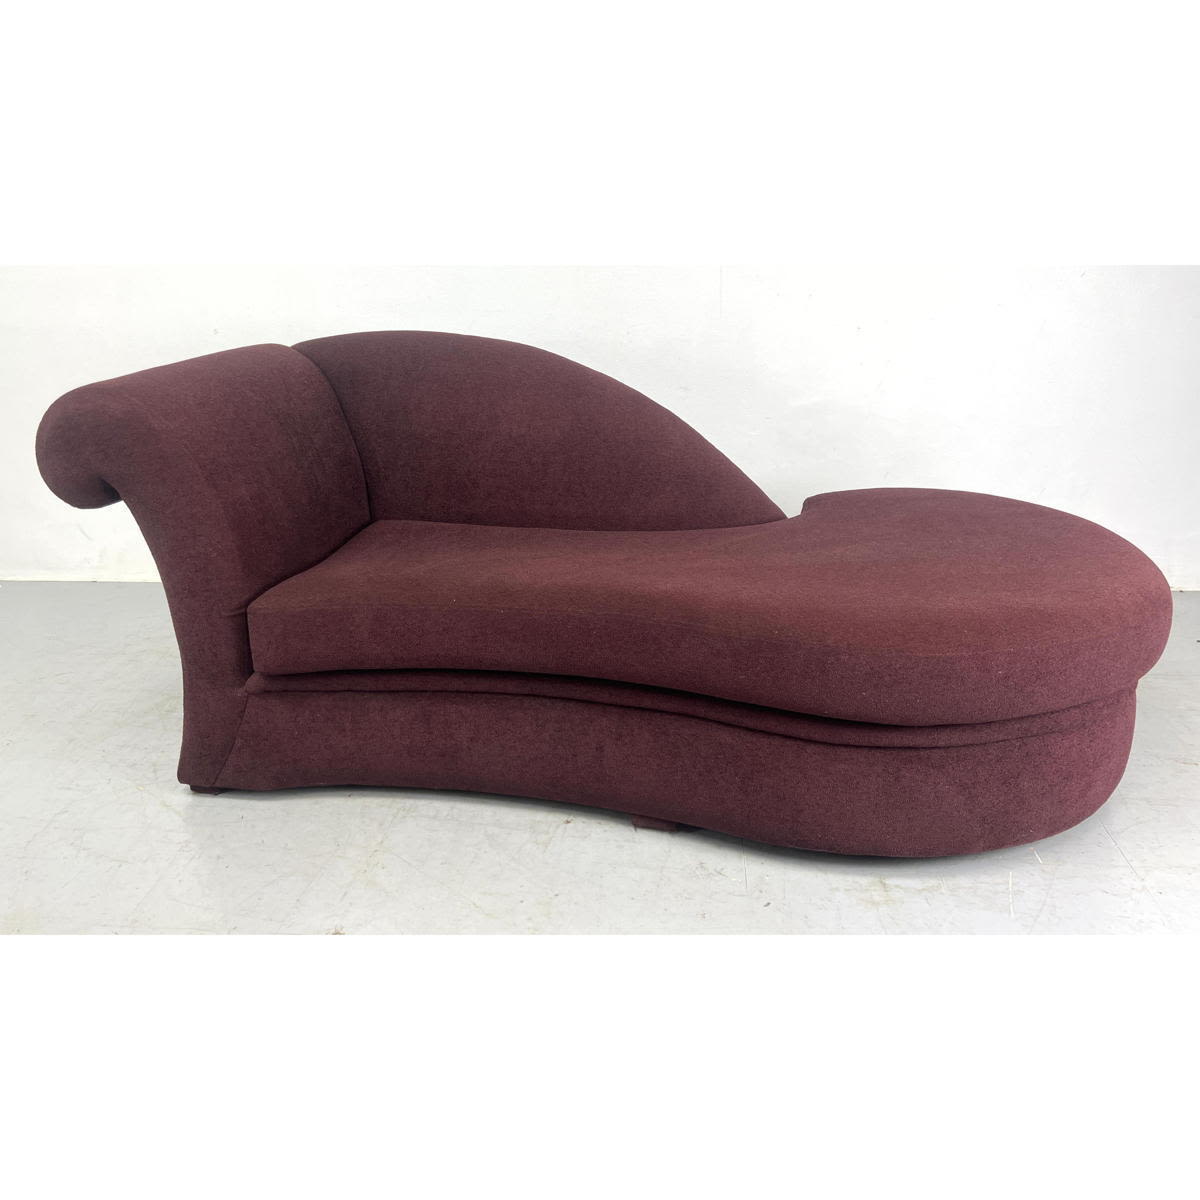 Kagan style Sexy Modernist Couch 300317